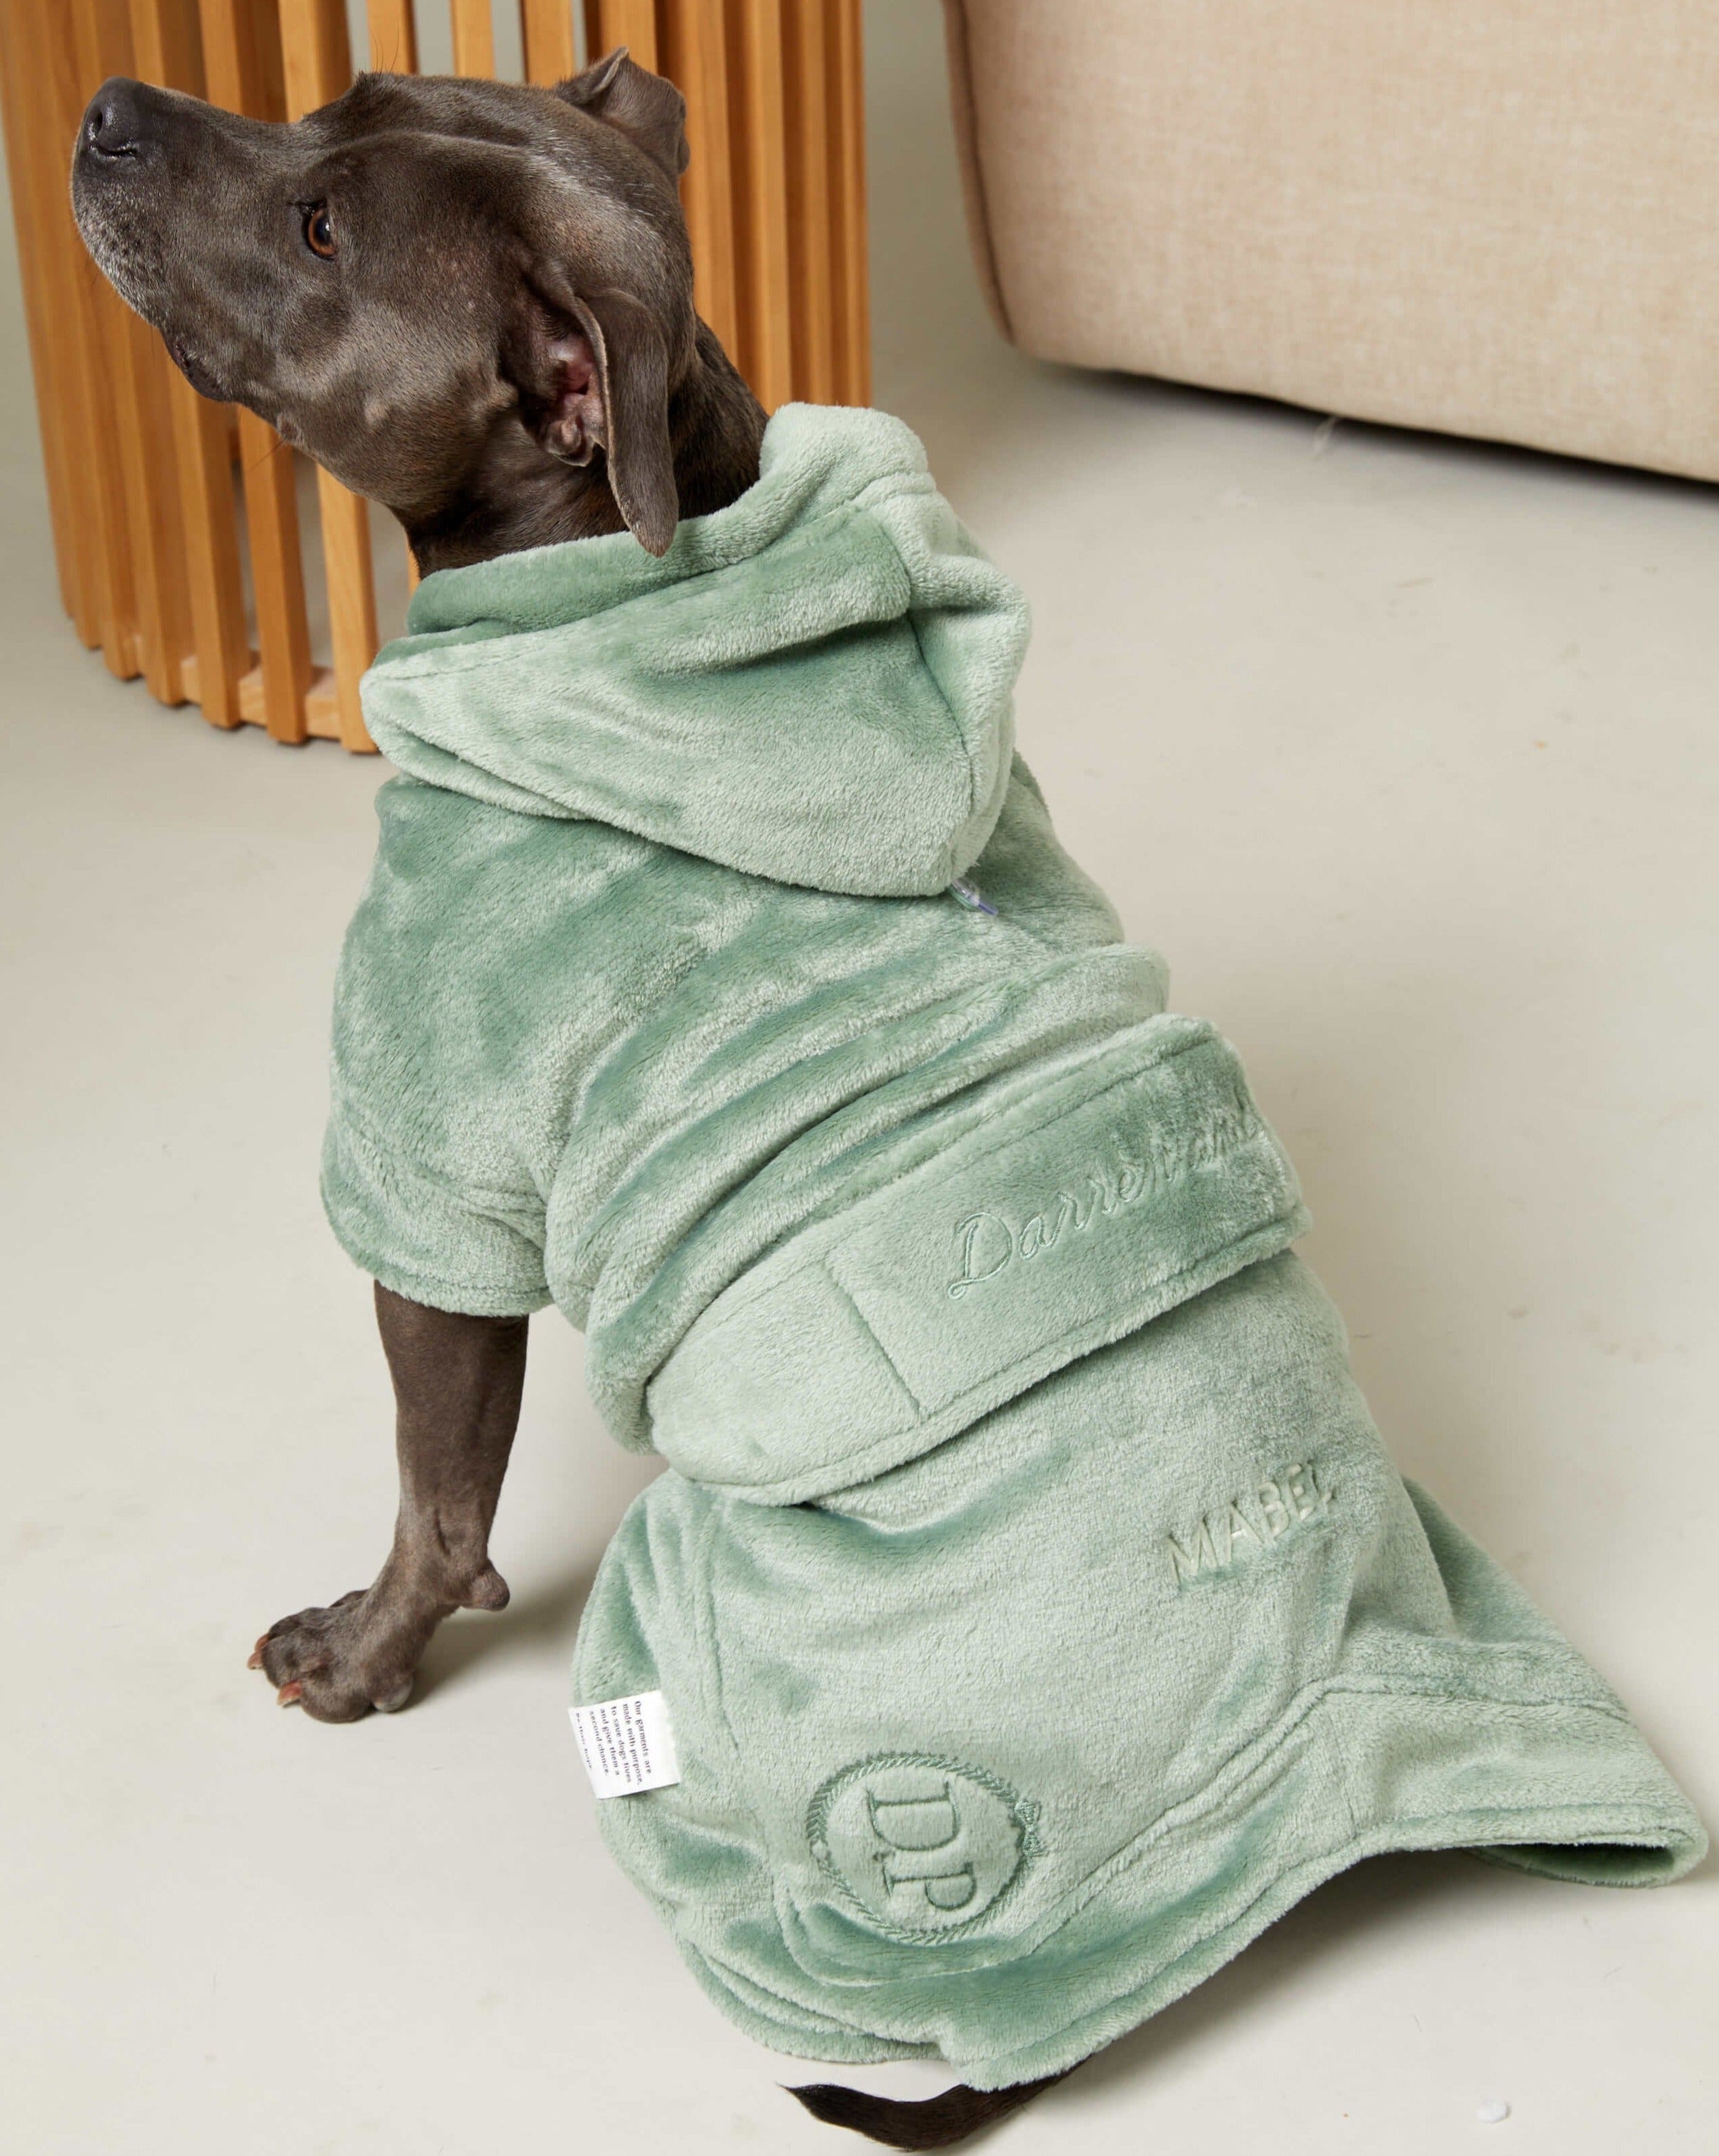 The Darren and Phillip personalised match your dog robe in green.